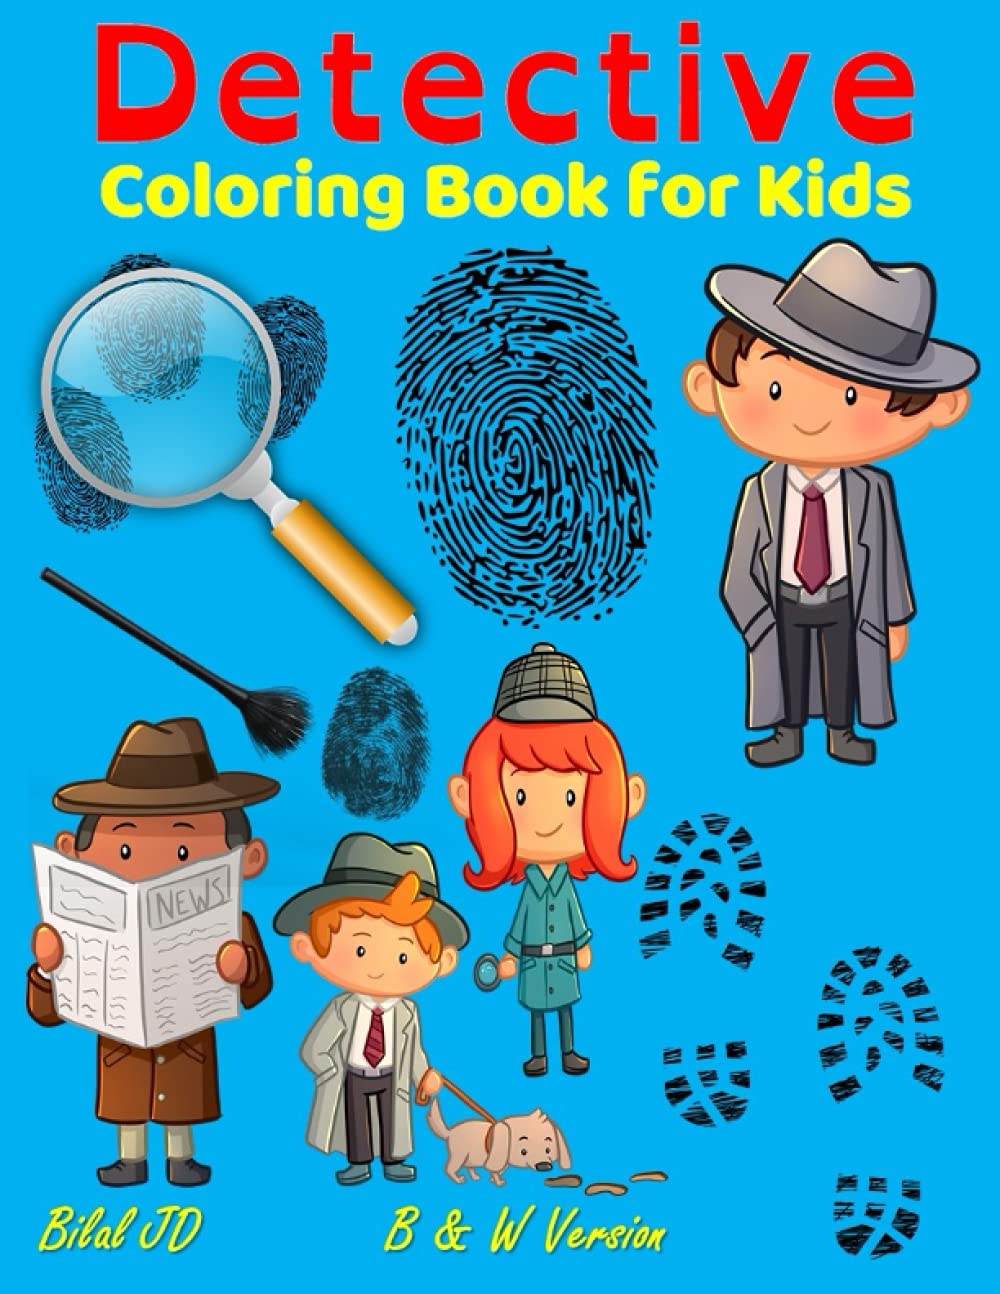 Spy / Detective Themed Coloring Books